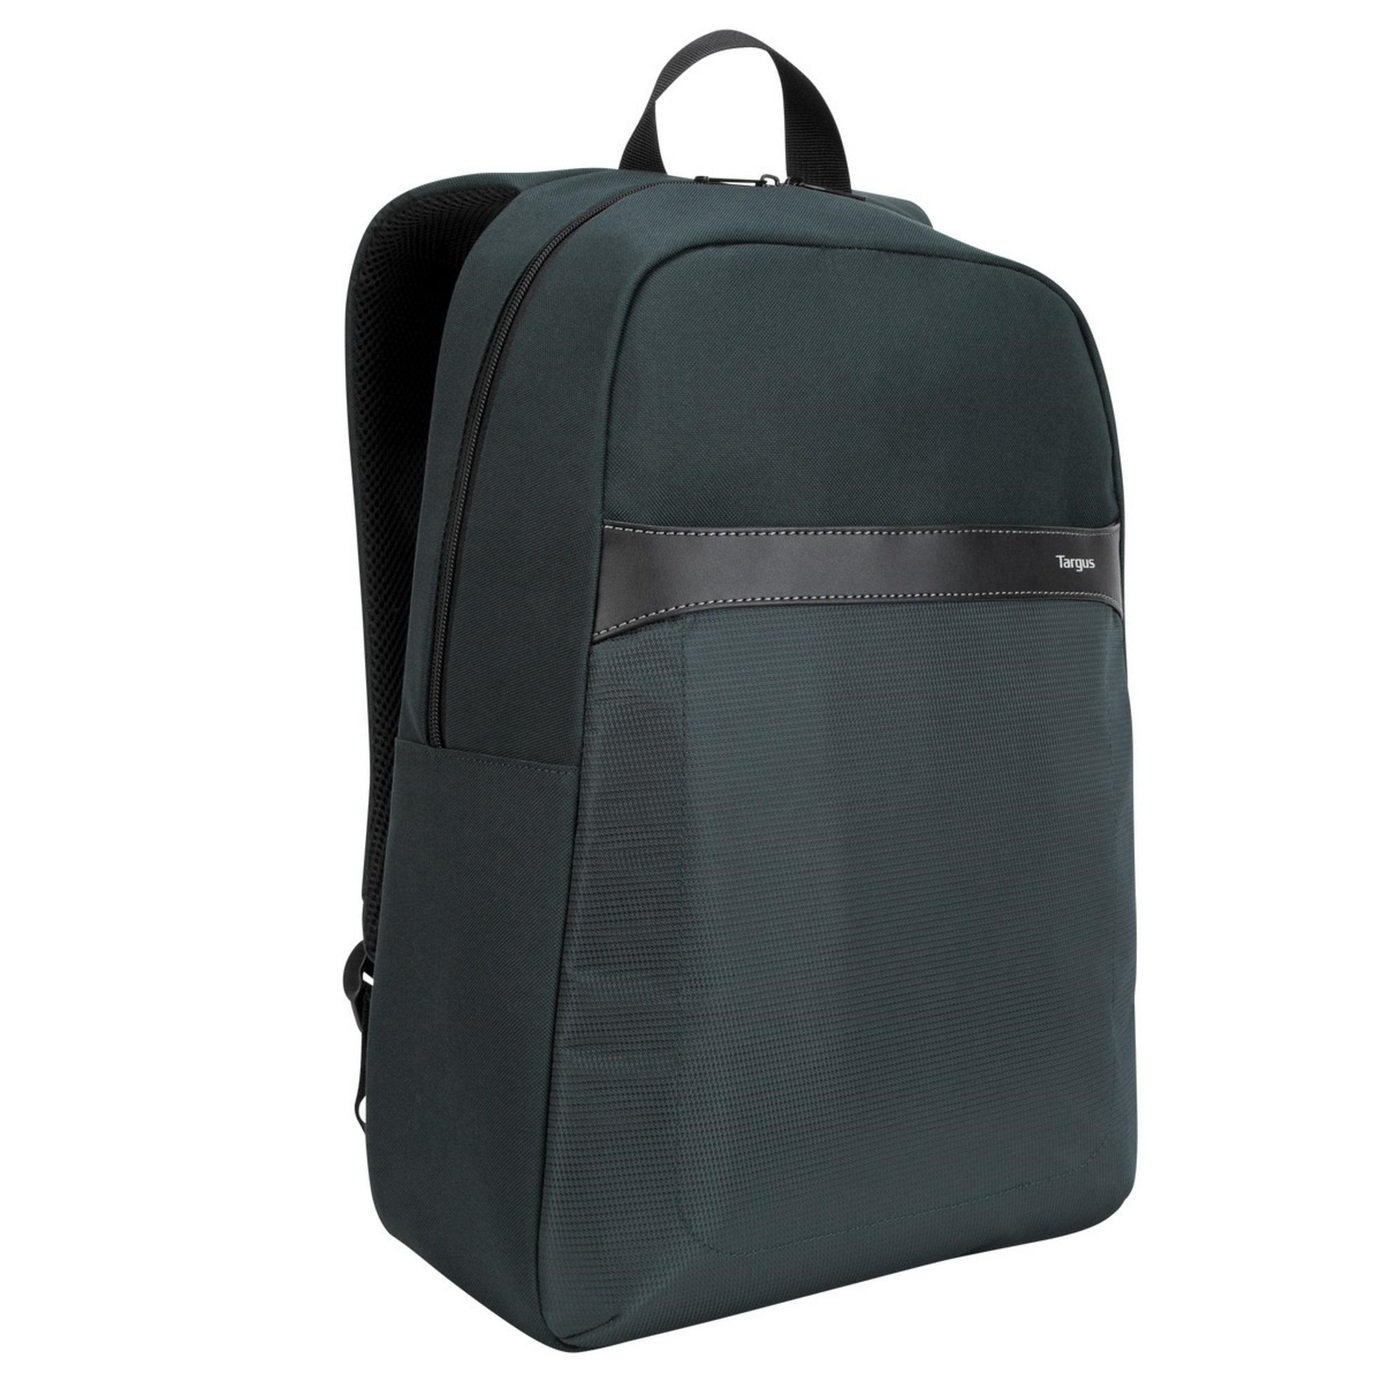 Targus GeoLite 15.6 Inch Laptop Backpack Review